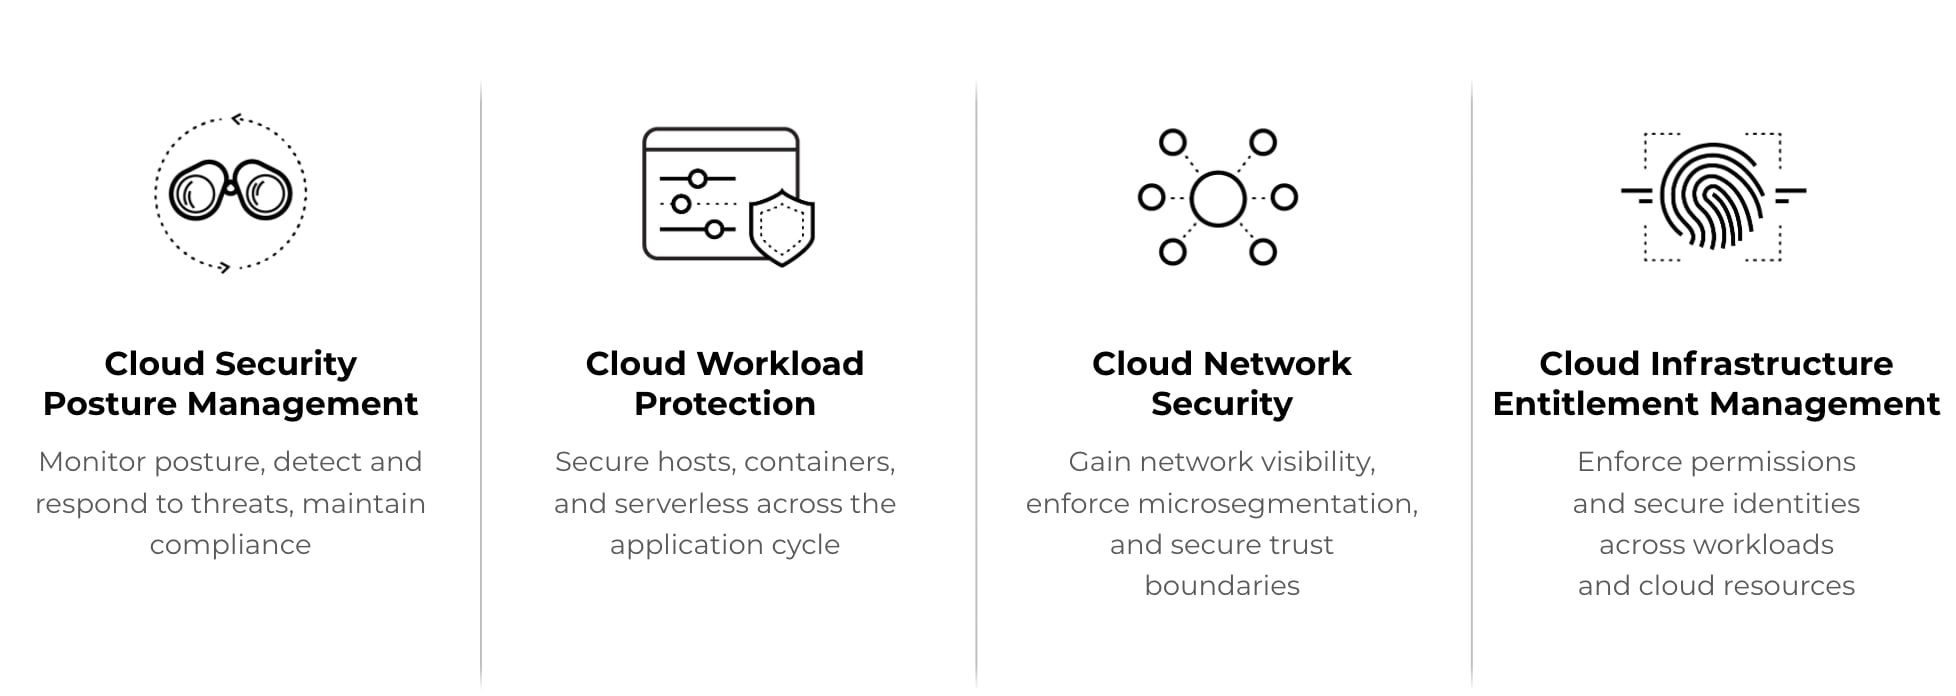 The four pillars of the Cloud Native Security Platform include Cloud Security Posture Management, Cloud Workload Protection, Cloud Network Security and Cloud Infrastructure Entitlement Management